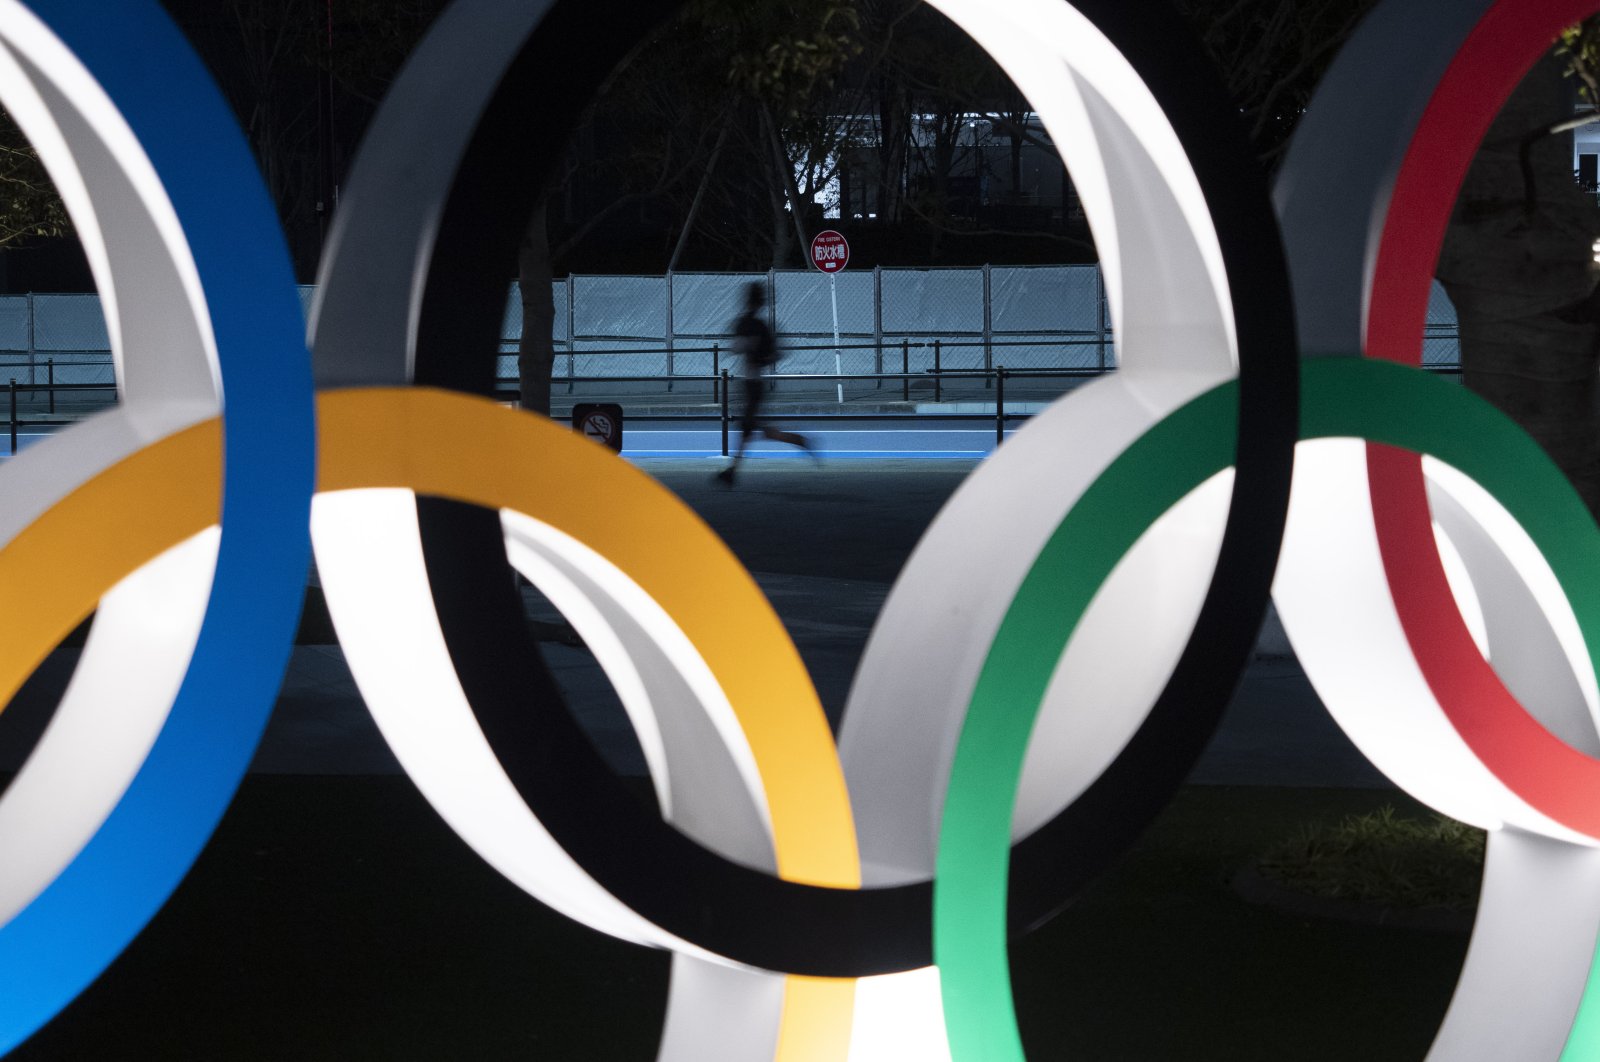 A man jogs past the Olympic rings in Tokyo, March 30, 2020. (AP Photo)